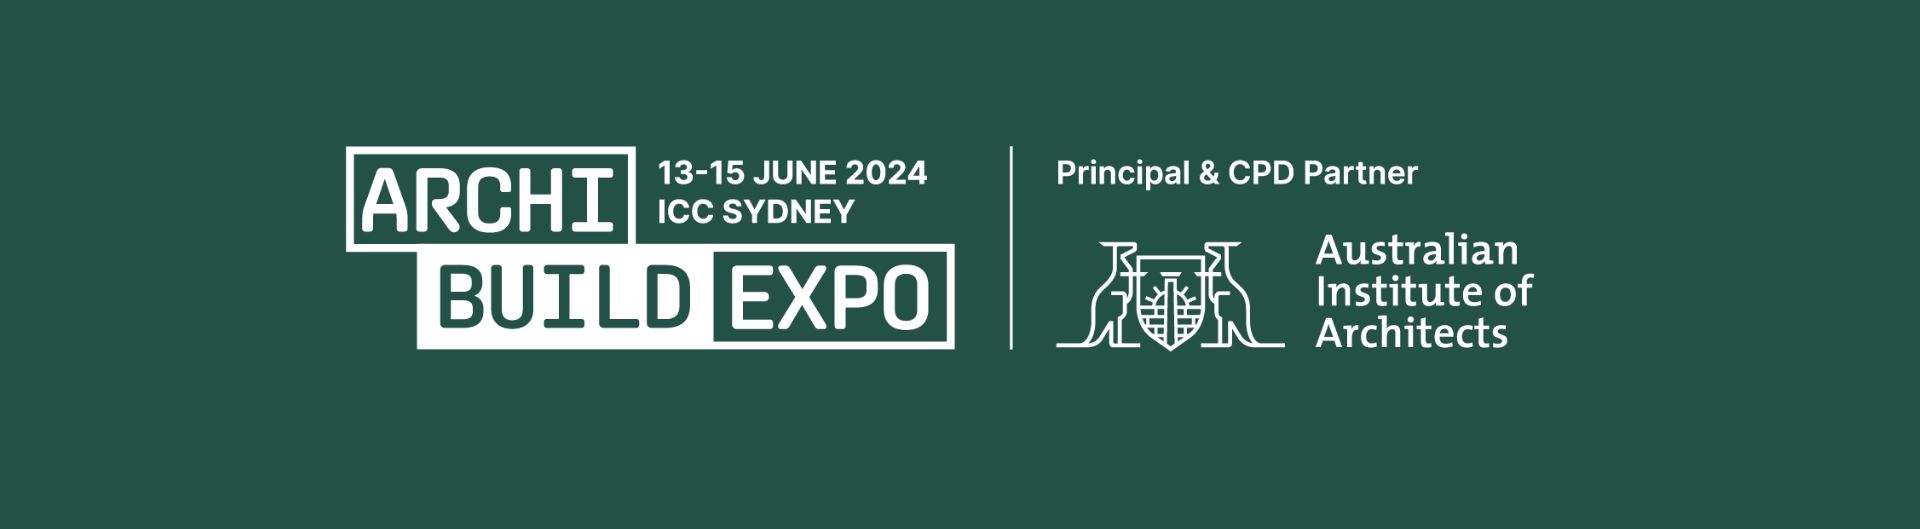 ArchiBuild Expo is coming to ICC Sydney on 13 to 15 June 2024.